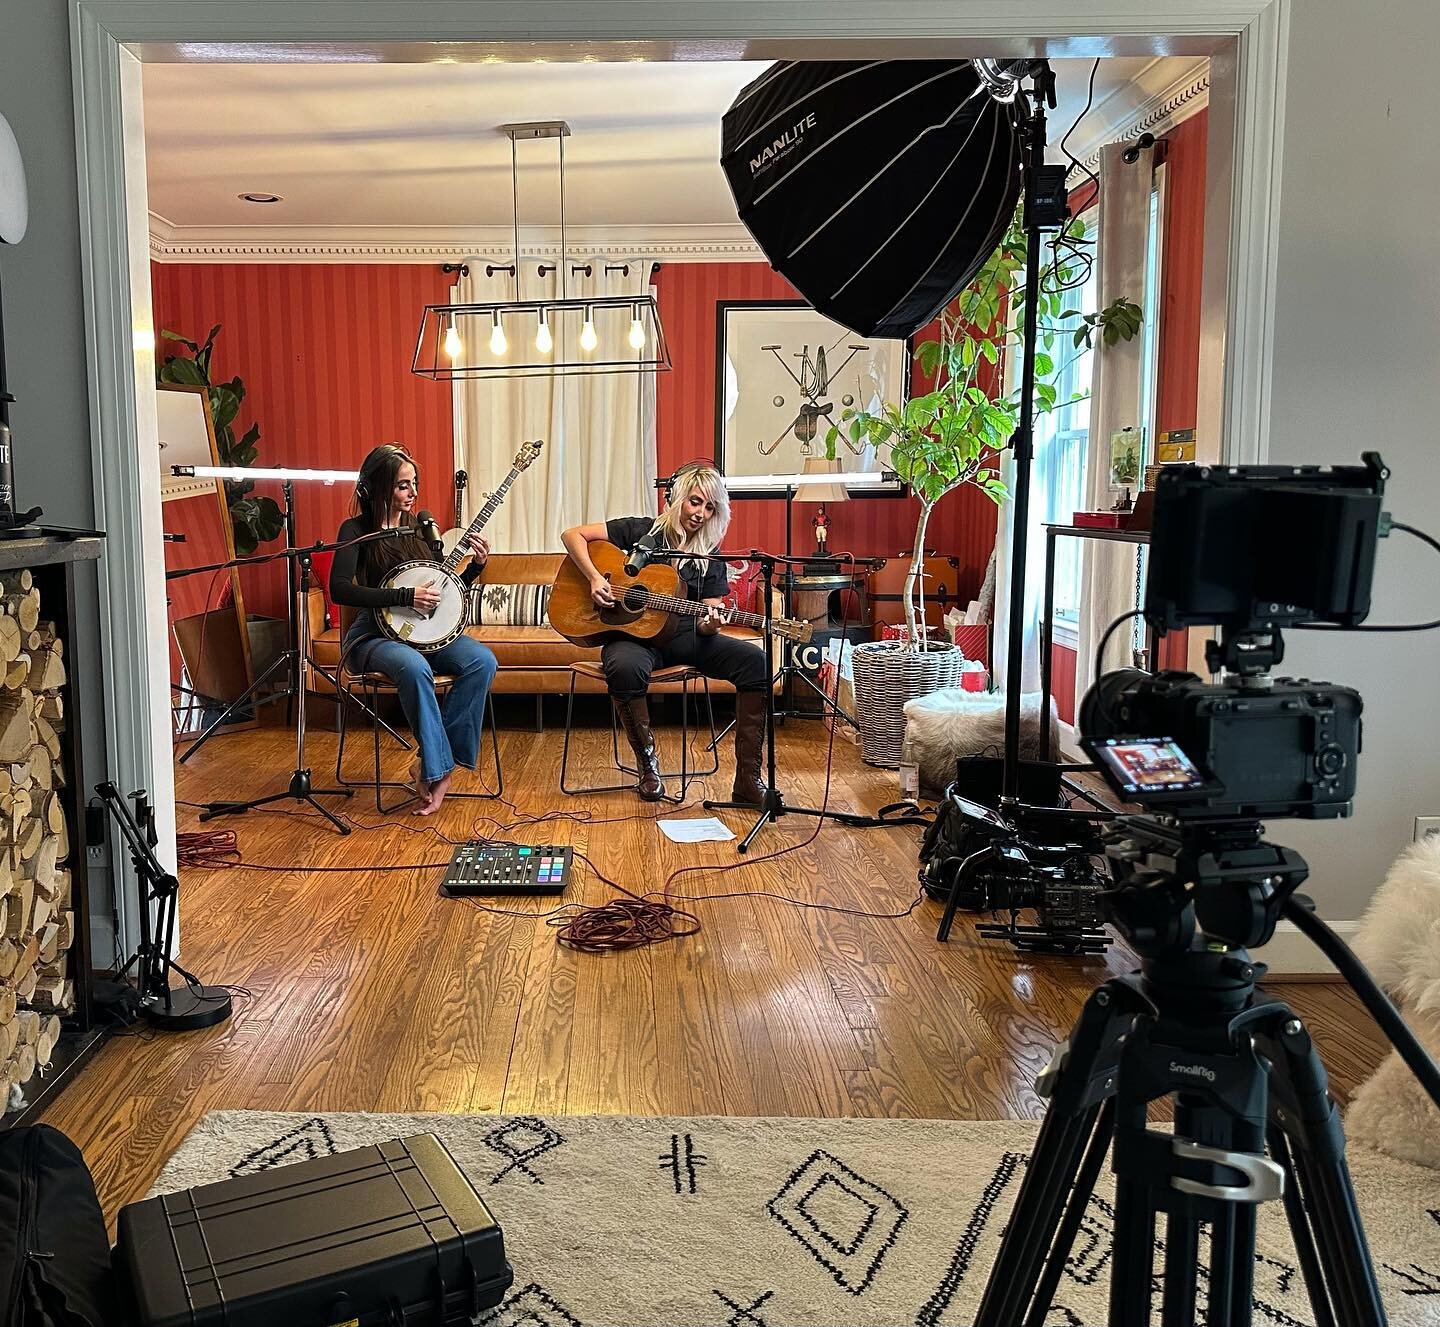 #bts 🎬📸 Exciting things coming your way soon! xx
.
.
.
.
.
.
.
.
.
.
.
.
.
.
.
.
.
.
.
#video#bts#photgraphy#duo#music#acoustic#martin#banjo#guitar#nashville